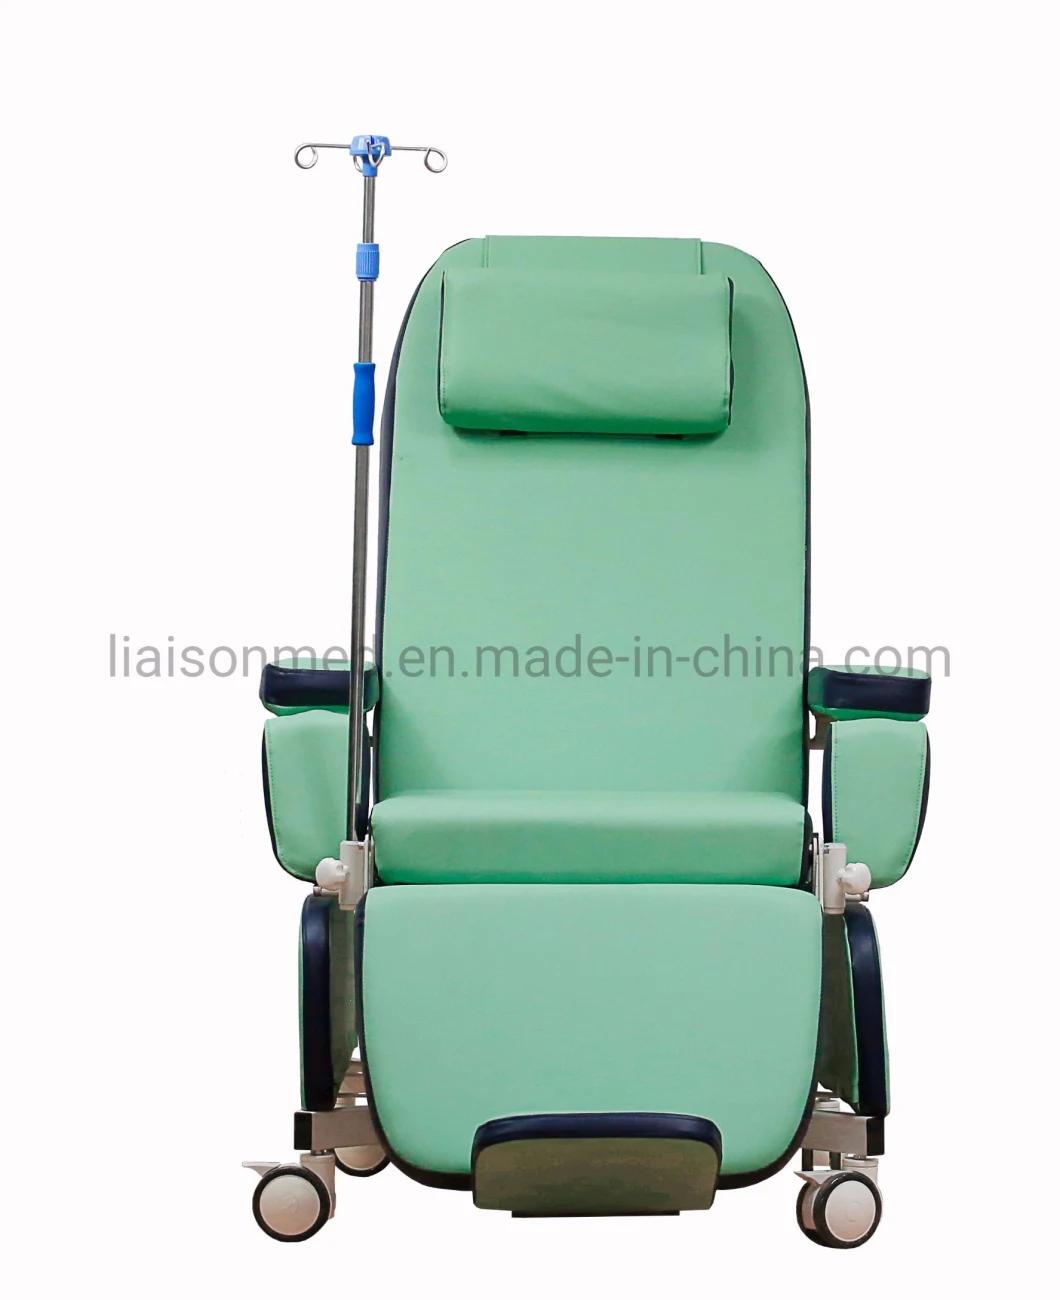 Mn-Bdc002 High Quality Medical Electric Blood Dialysis Treatment Chair